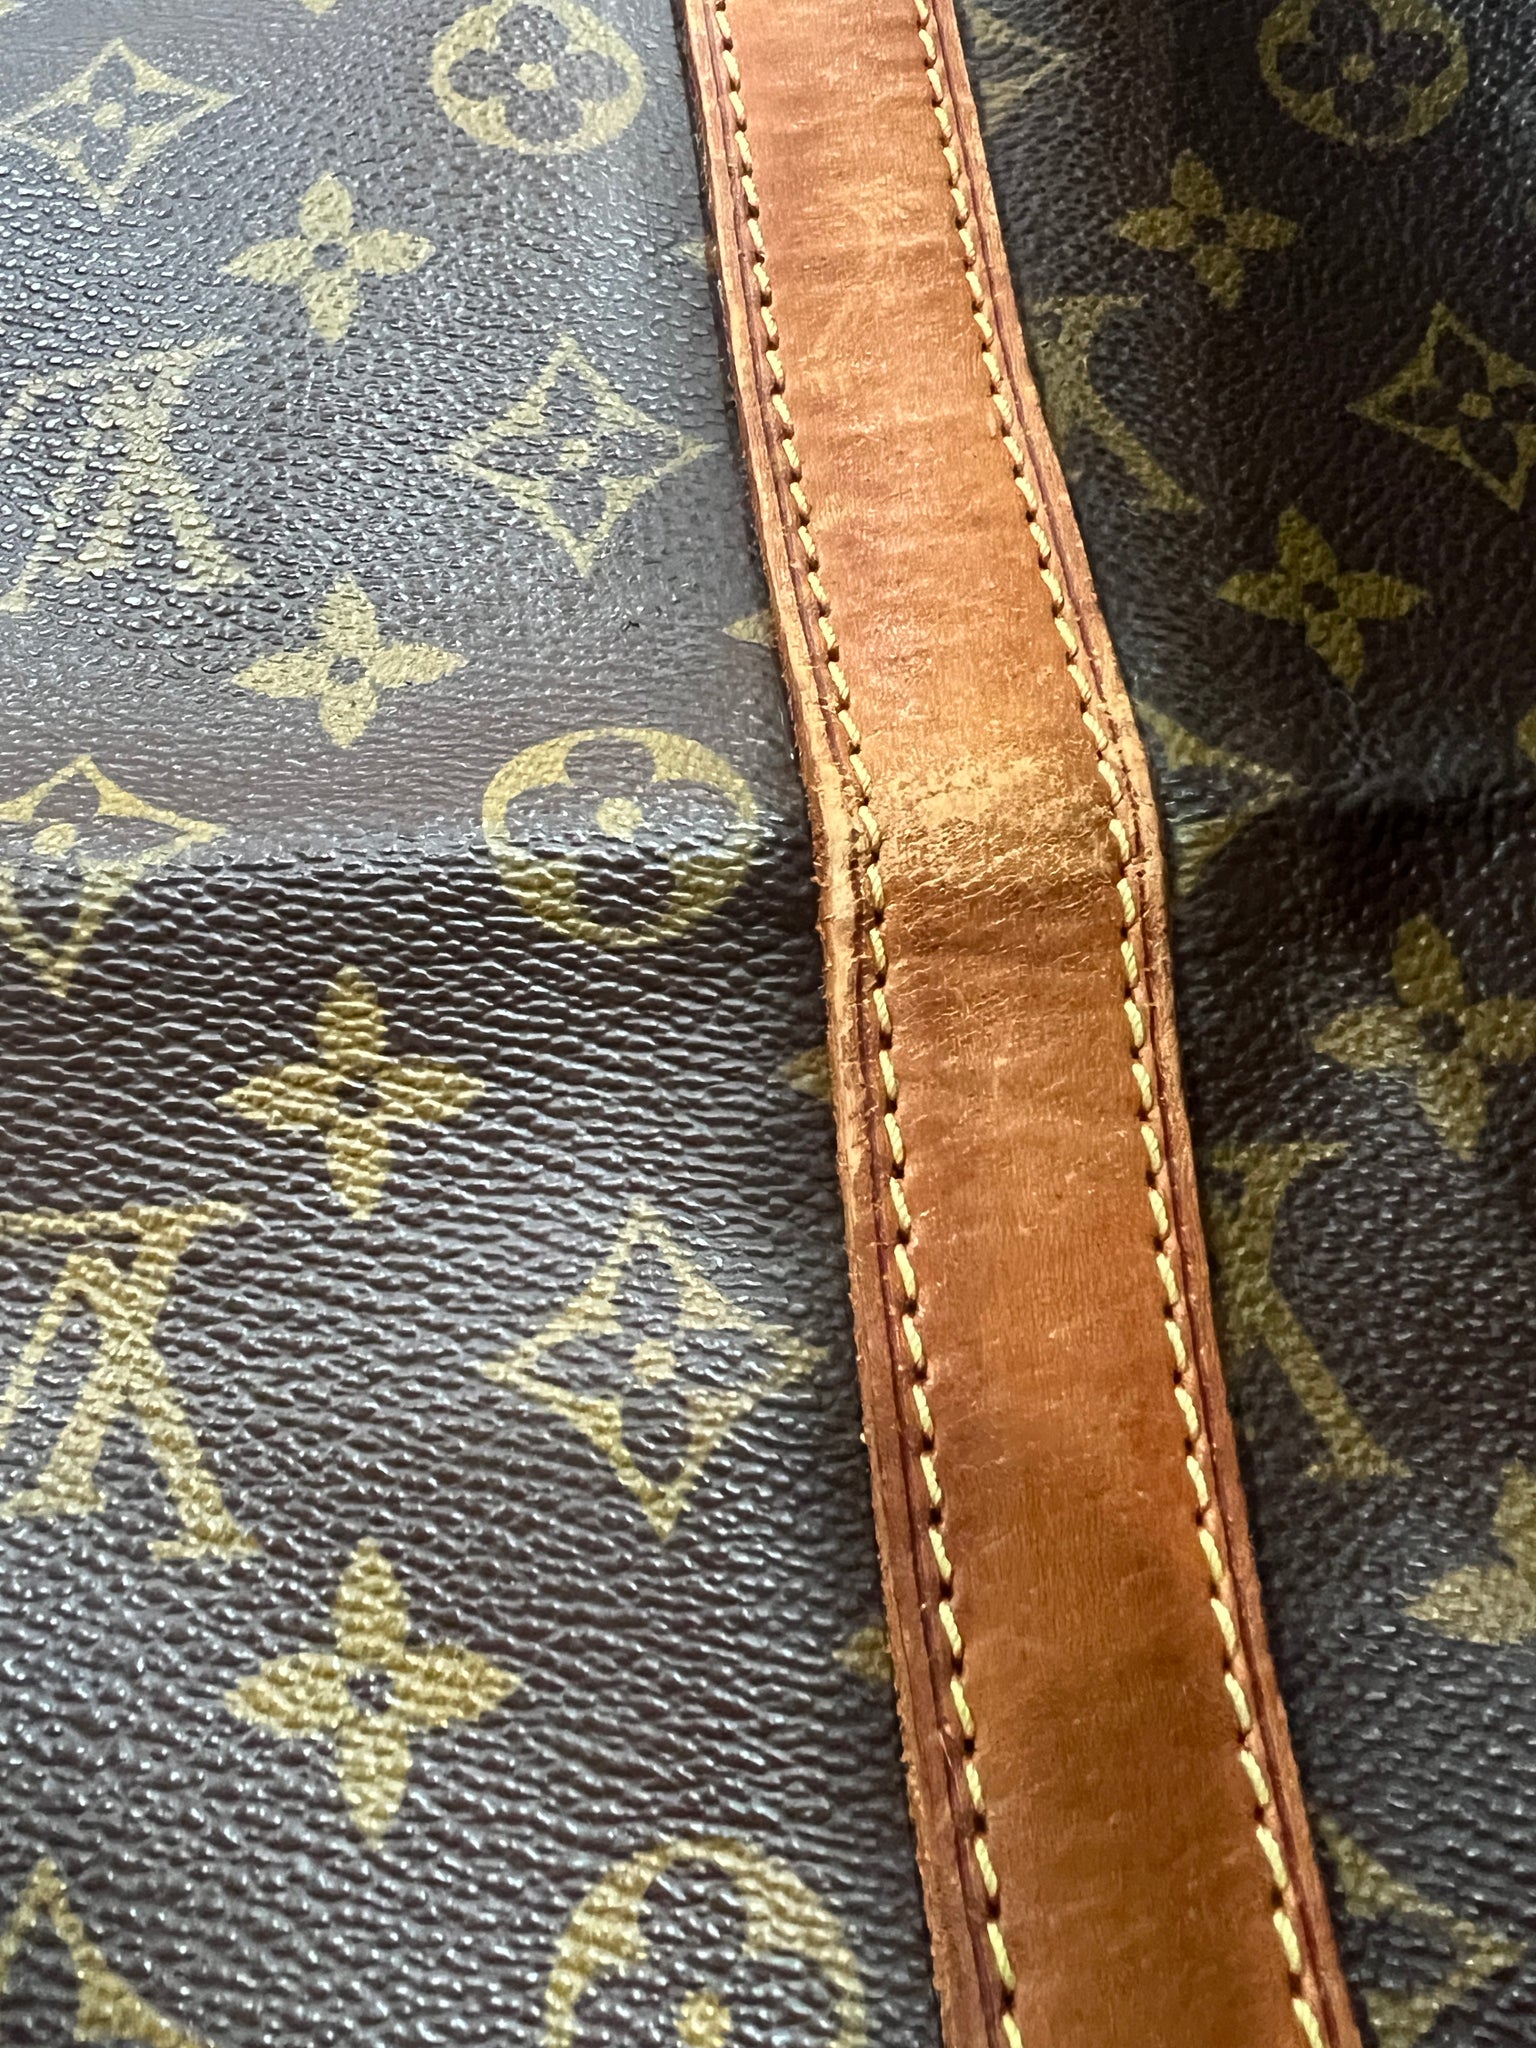 Authentic Louis Vuitton Keepall 55 Travel Bag – Relics to Rhinestones